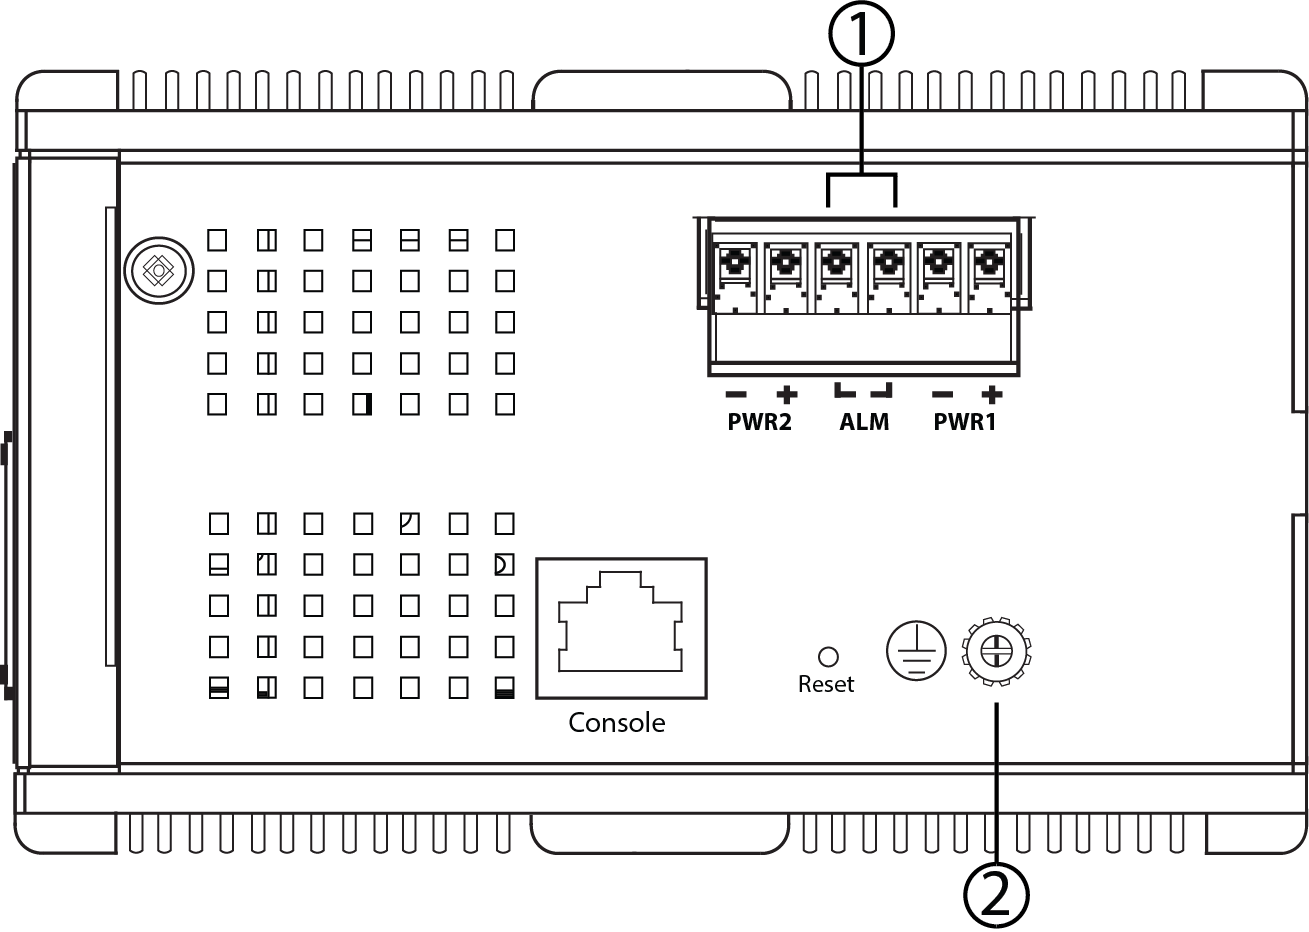 Alarm Relay and Ground Connectors for the 8-port and 12-port Switches